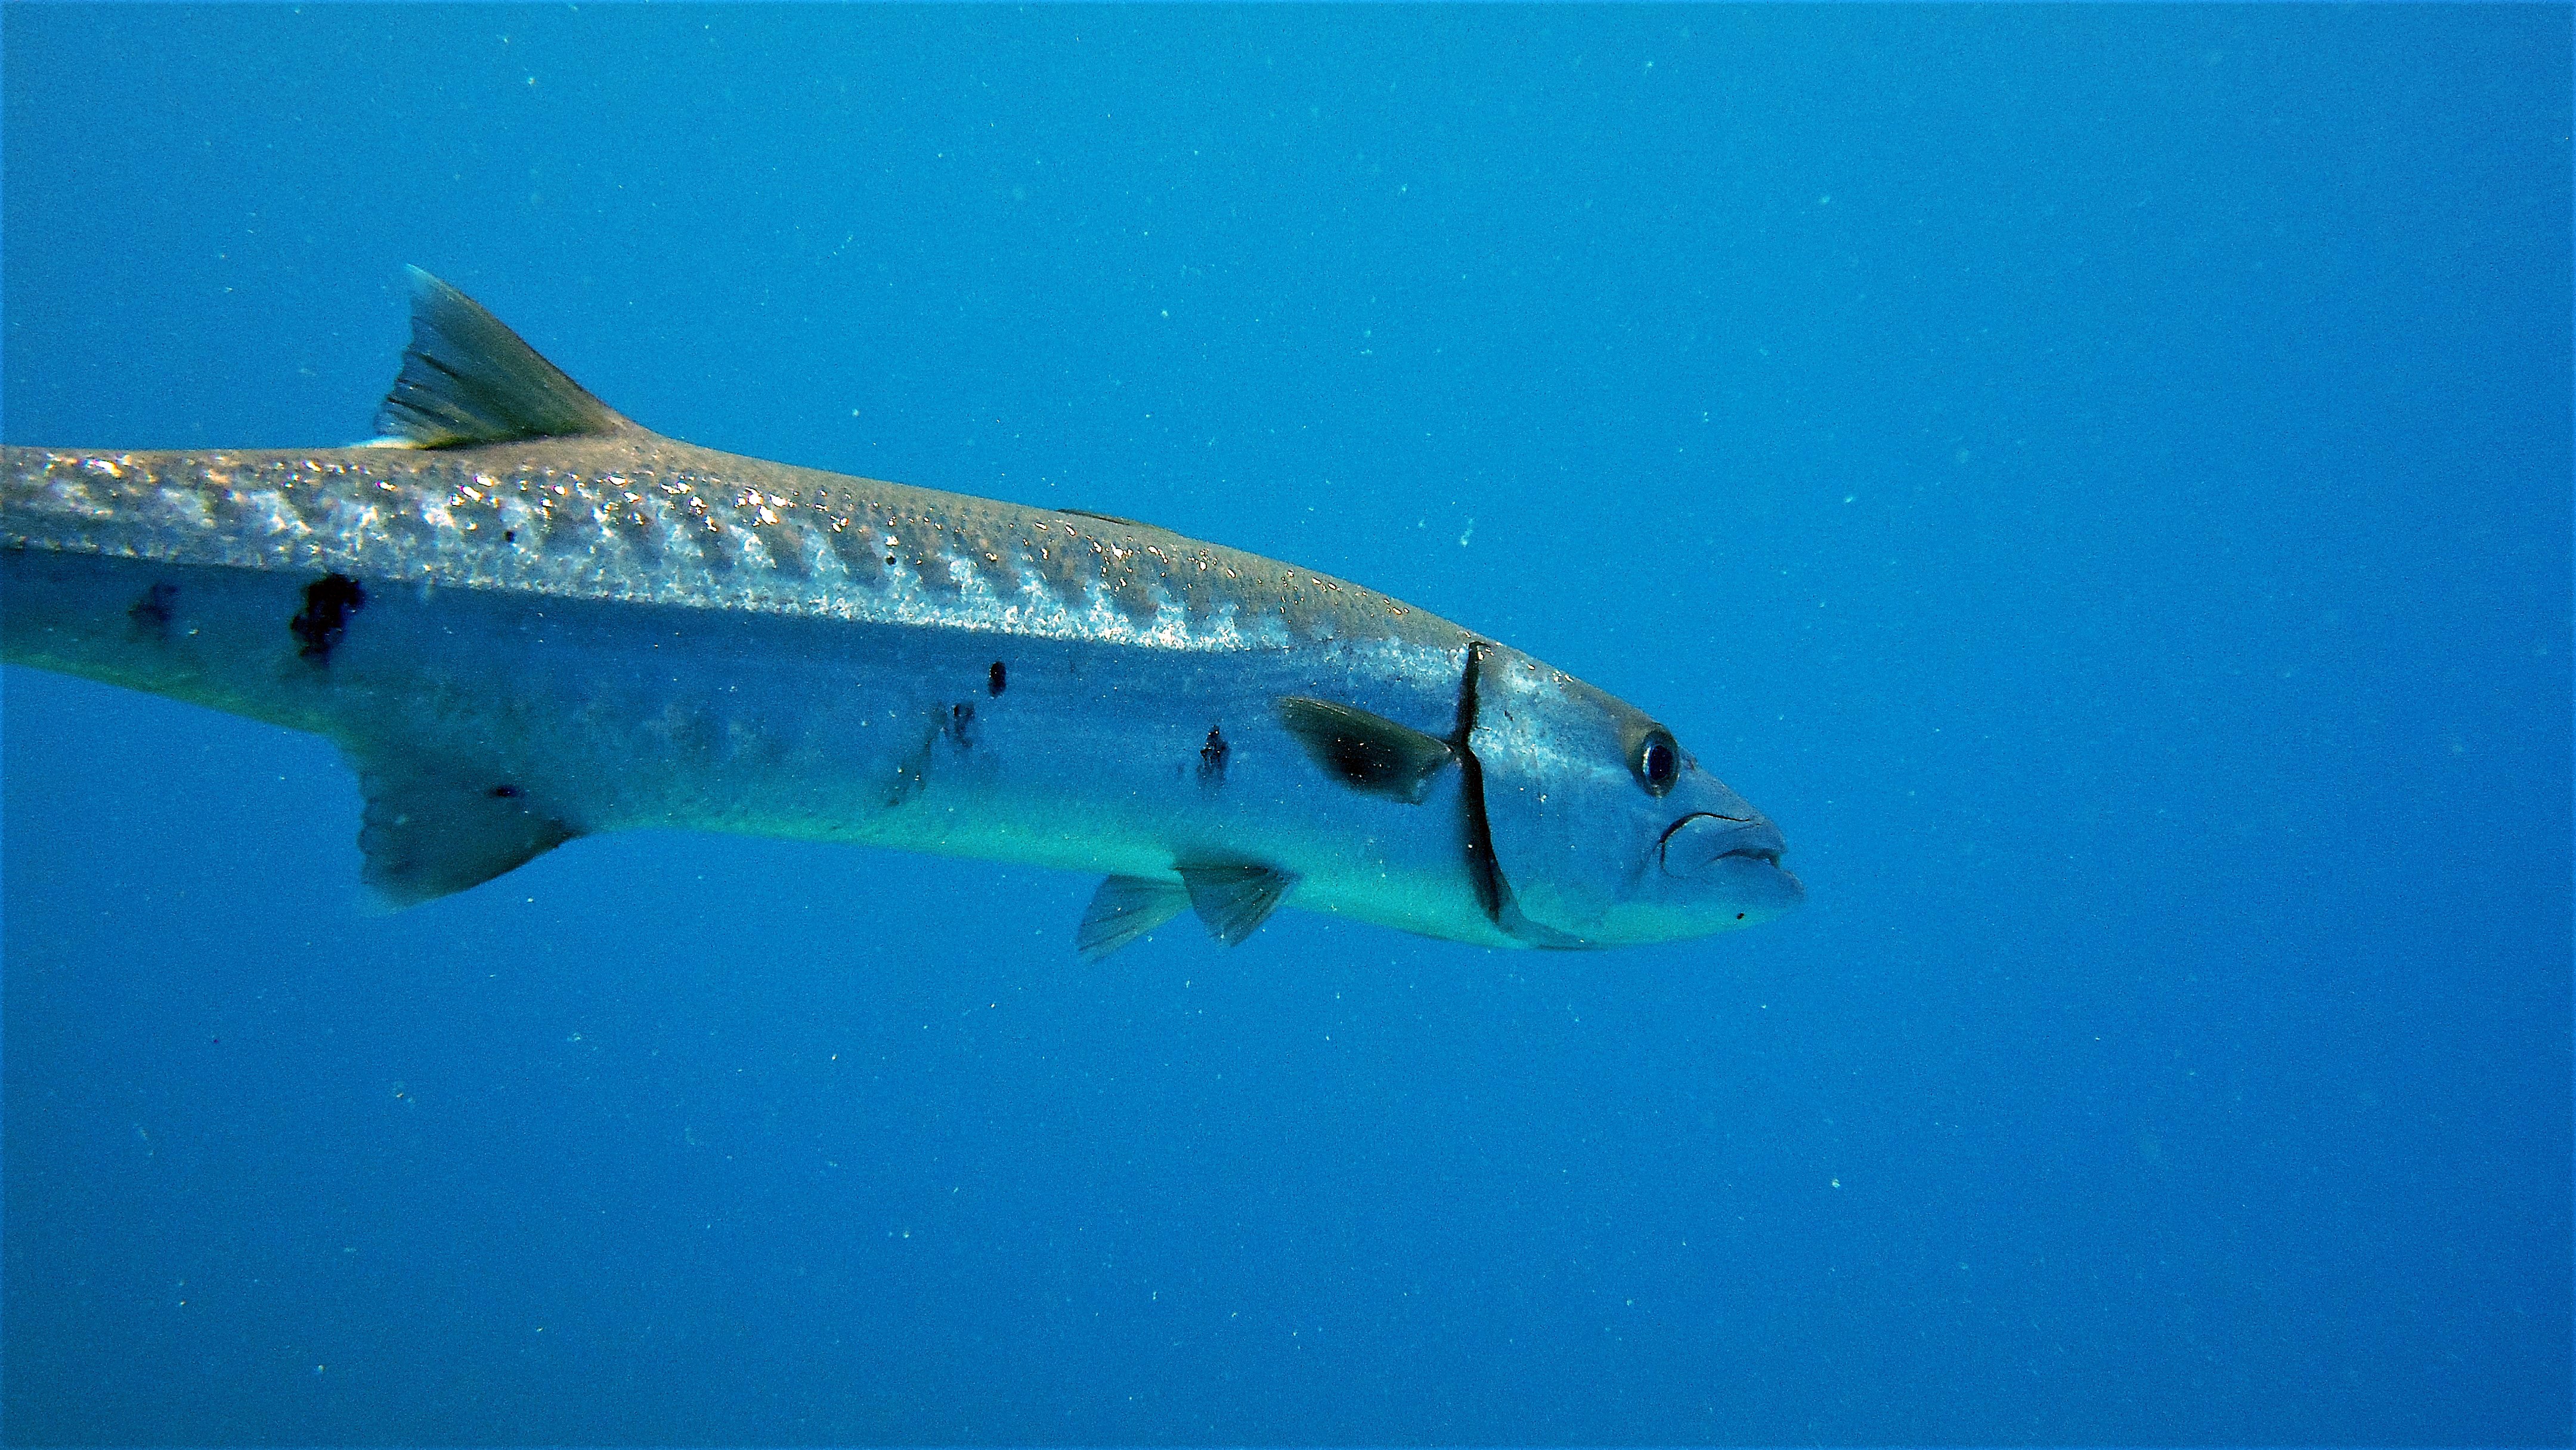 Fishing for Barracuda off the Mexican coast